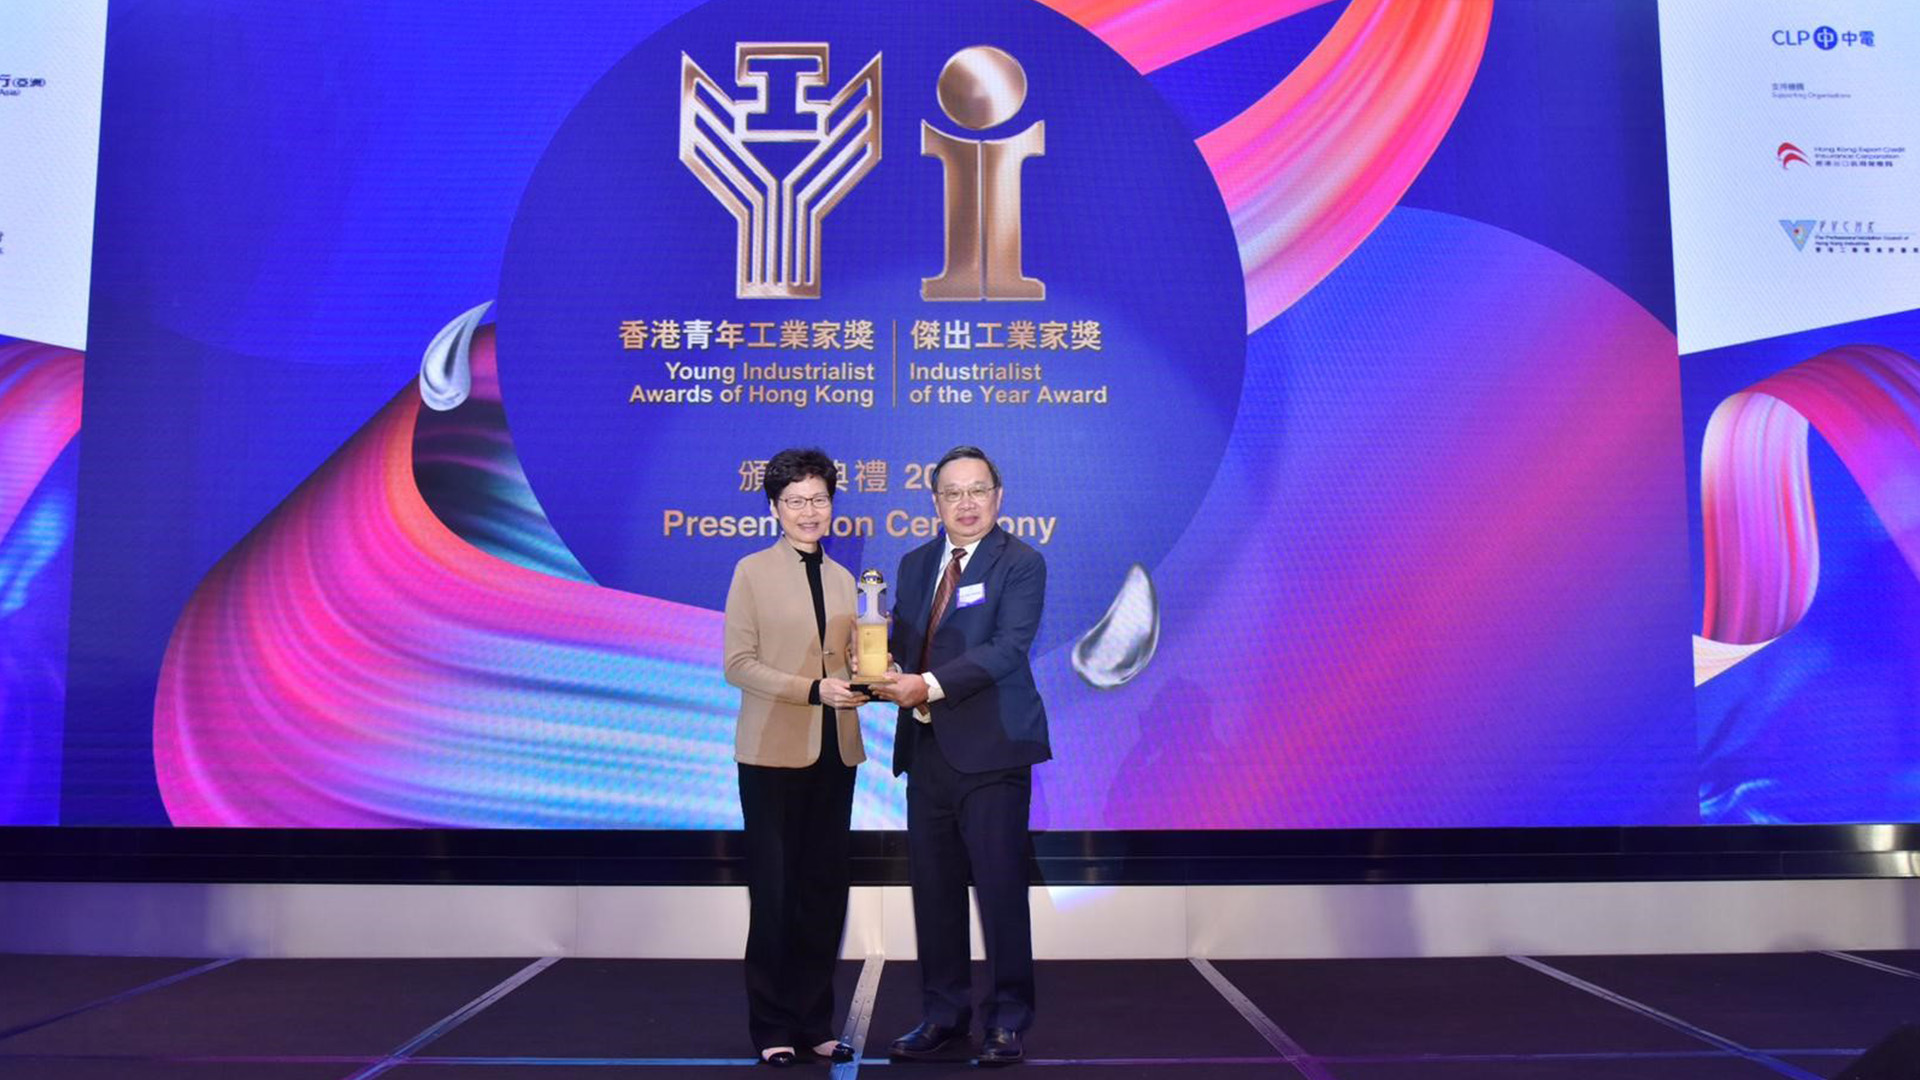 ASMPT CEO Named '"Industrialist Of The Year” At Federation Of Hong Kong Industries’ Awards 2019